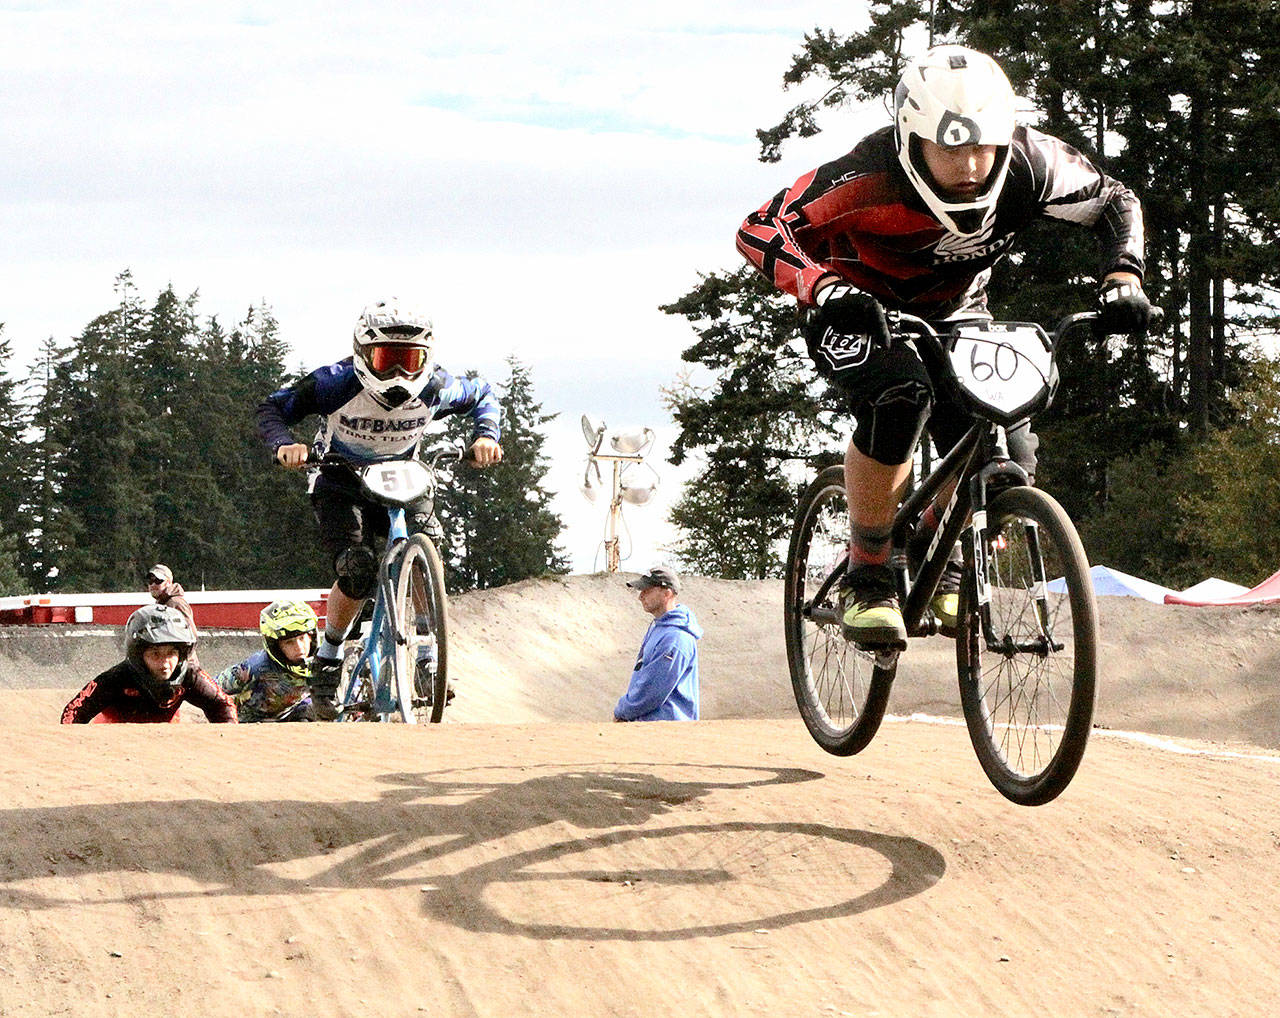 Roughly 500 BMX riders from all around Washington were at Lincoln Park in Port Angeles this weekend for the Washington State BMX championships. On Sunday were the state championship triple-point races. Here, Joseph Ritchie of Port Angeles (No. 60), leads a pack of racers in the age 12 cruiser division. No. 51 Is Malcolm Evans from Bellingham. For results, be sure to check the sports section of the Peninsula Daily News on Tuesday. (Dave Logan/Peninsula Daily News)